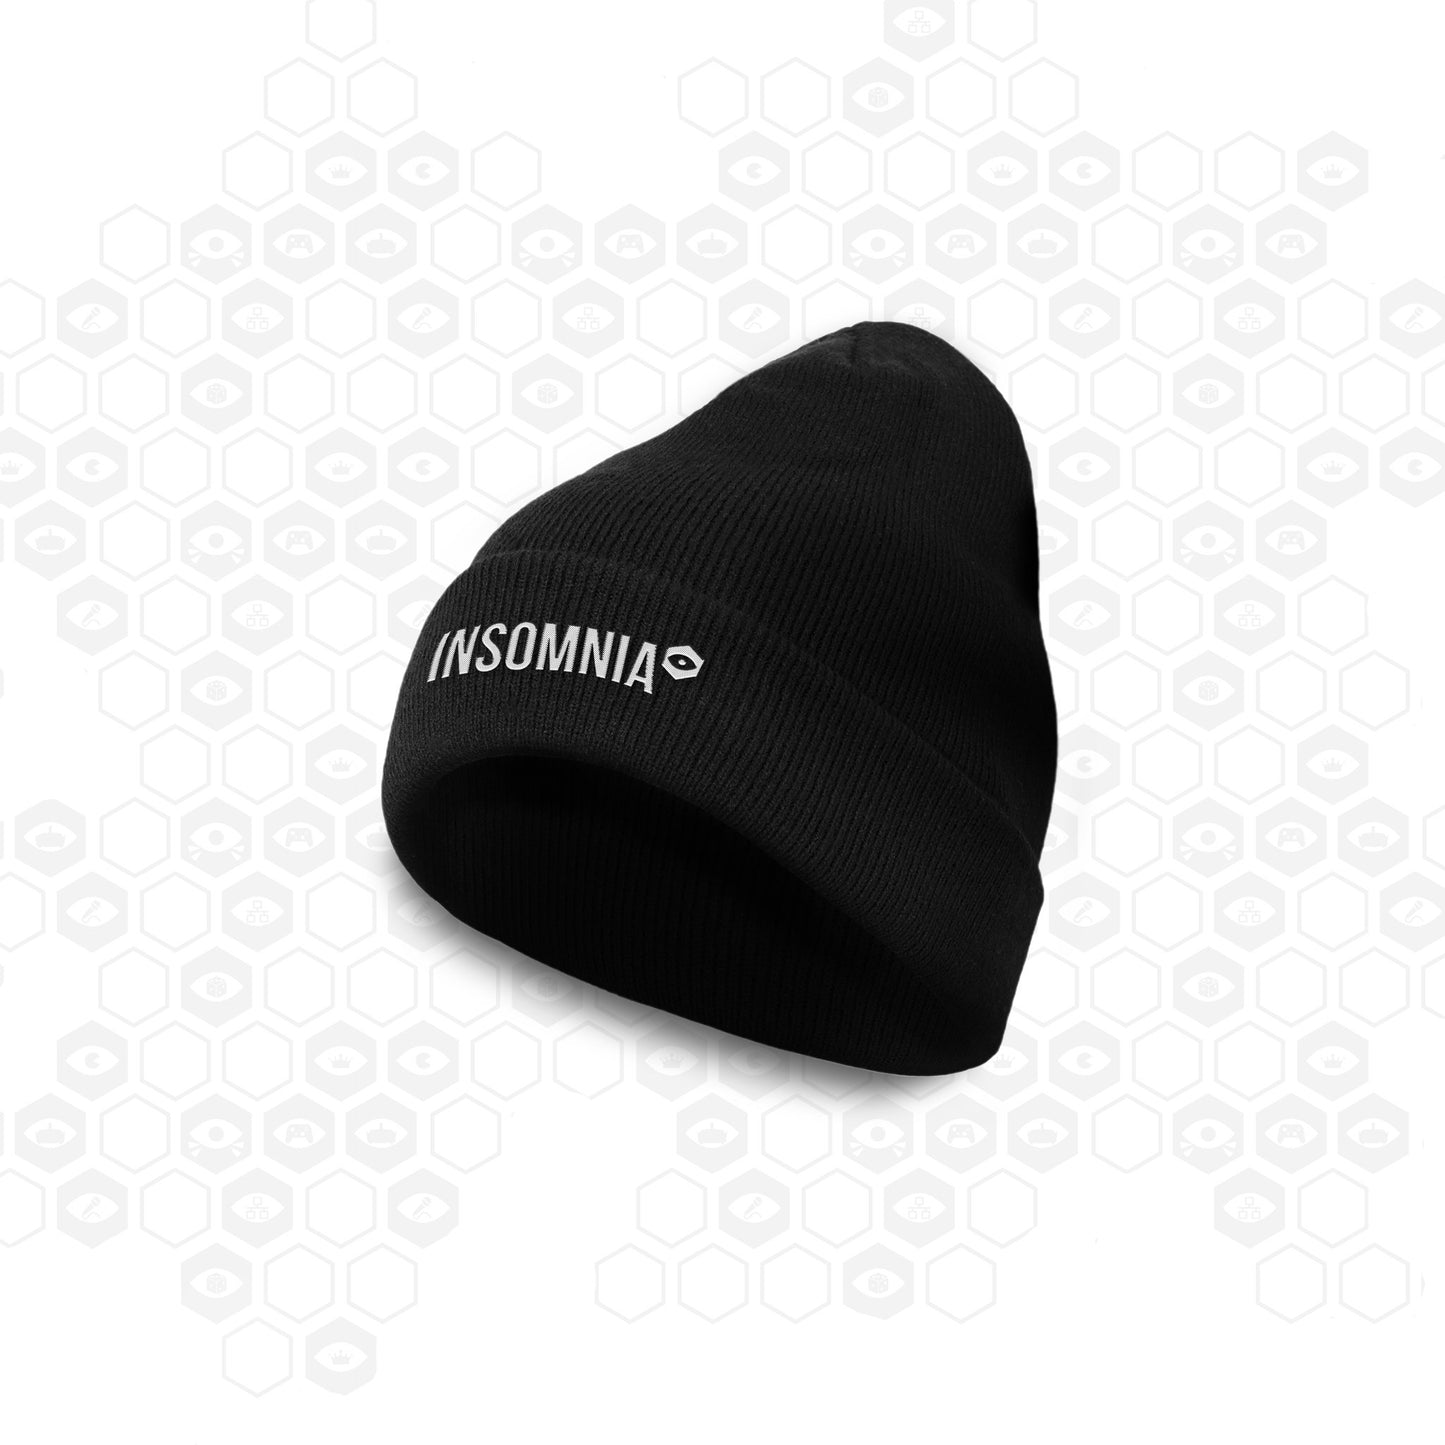 Black knitted beanie with embroidered Insomnia logo 